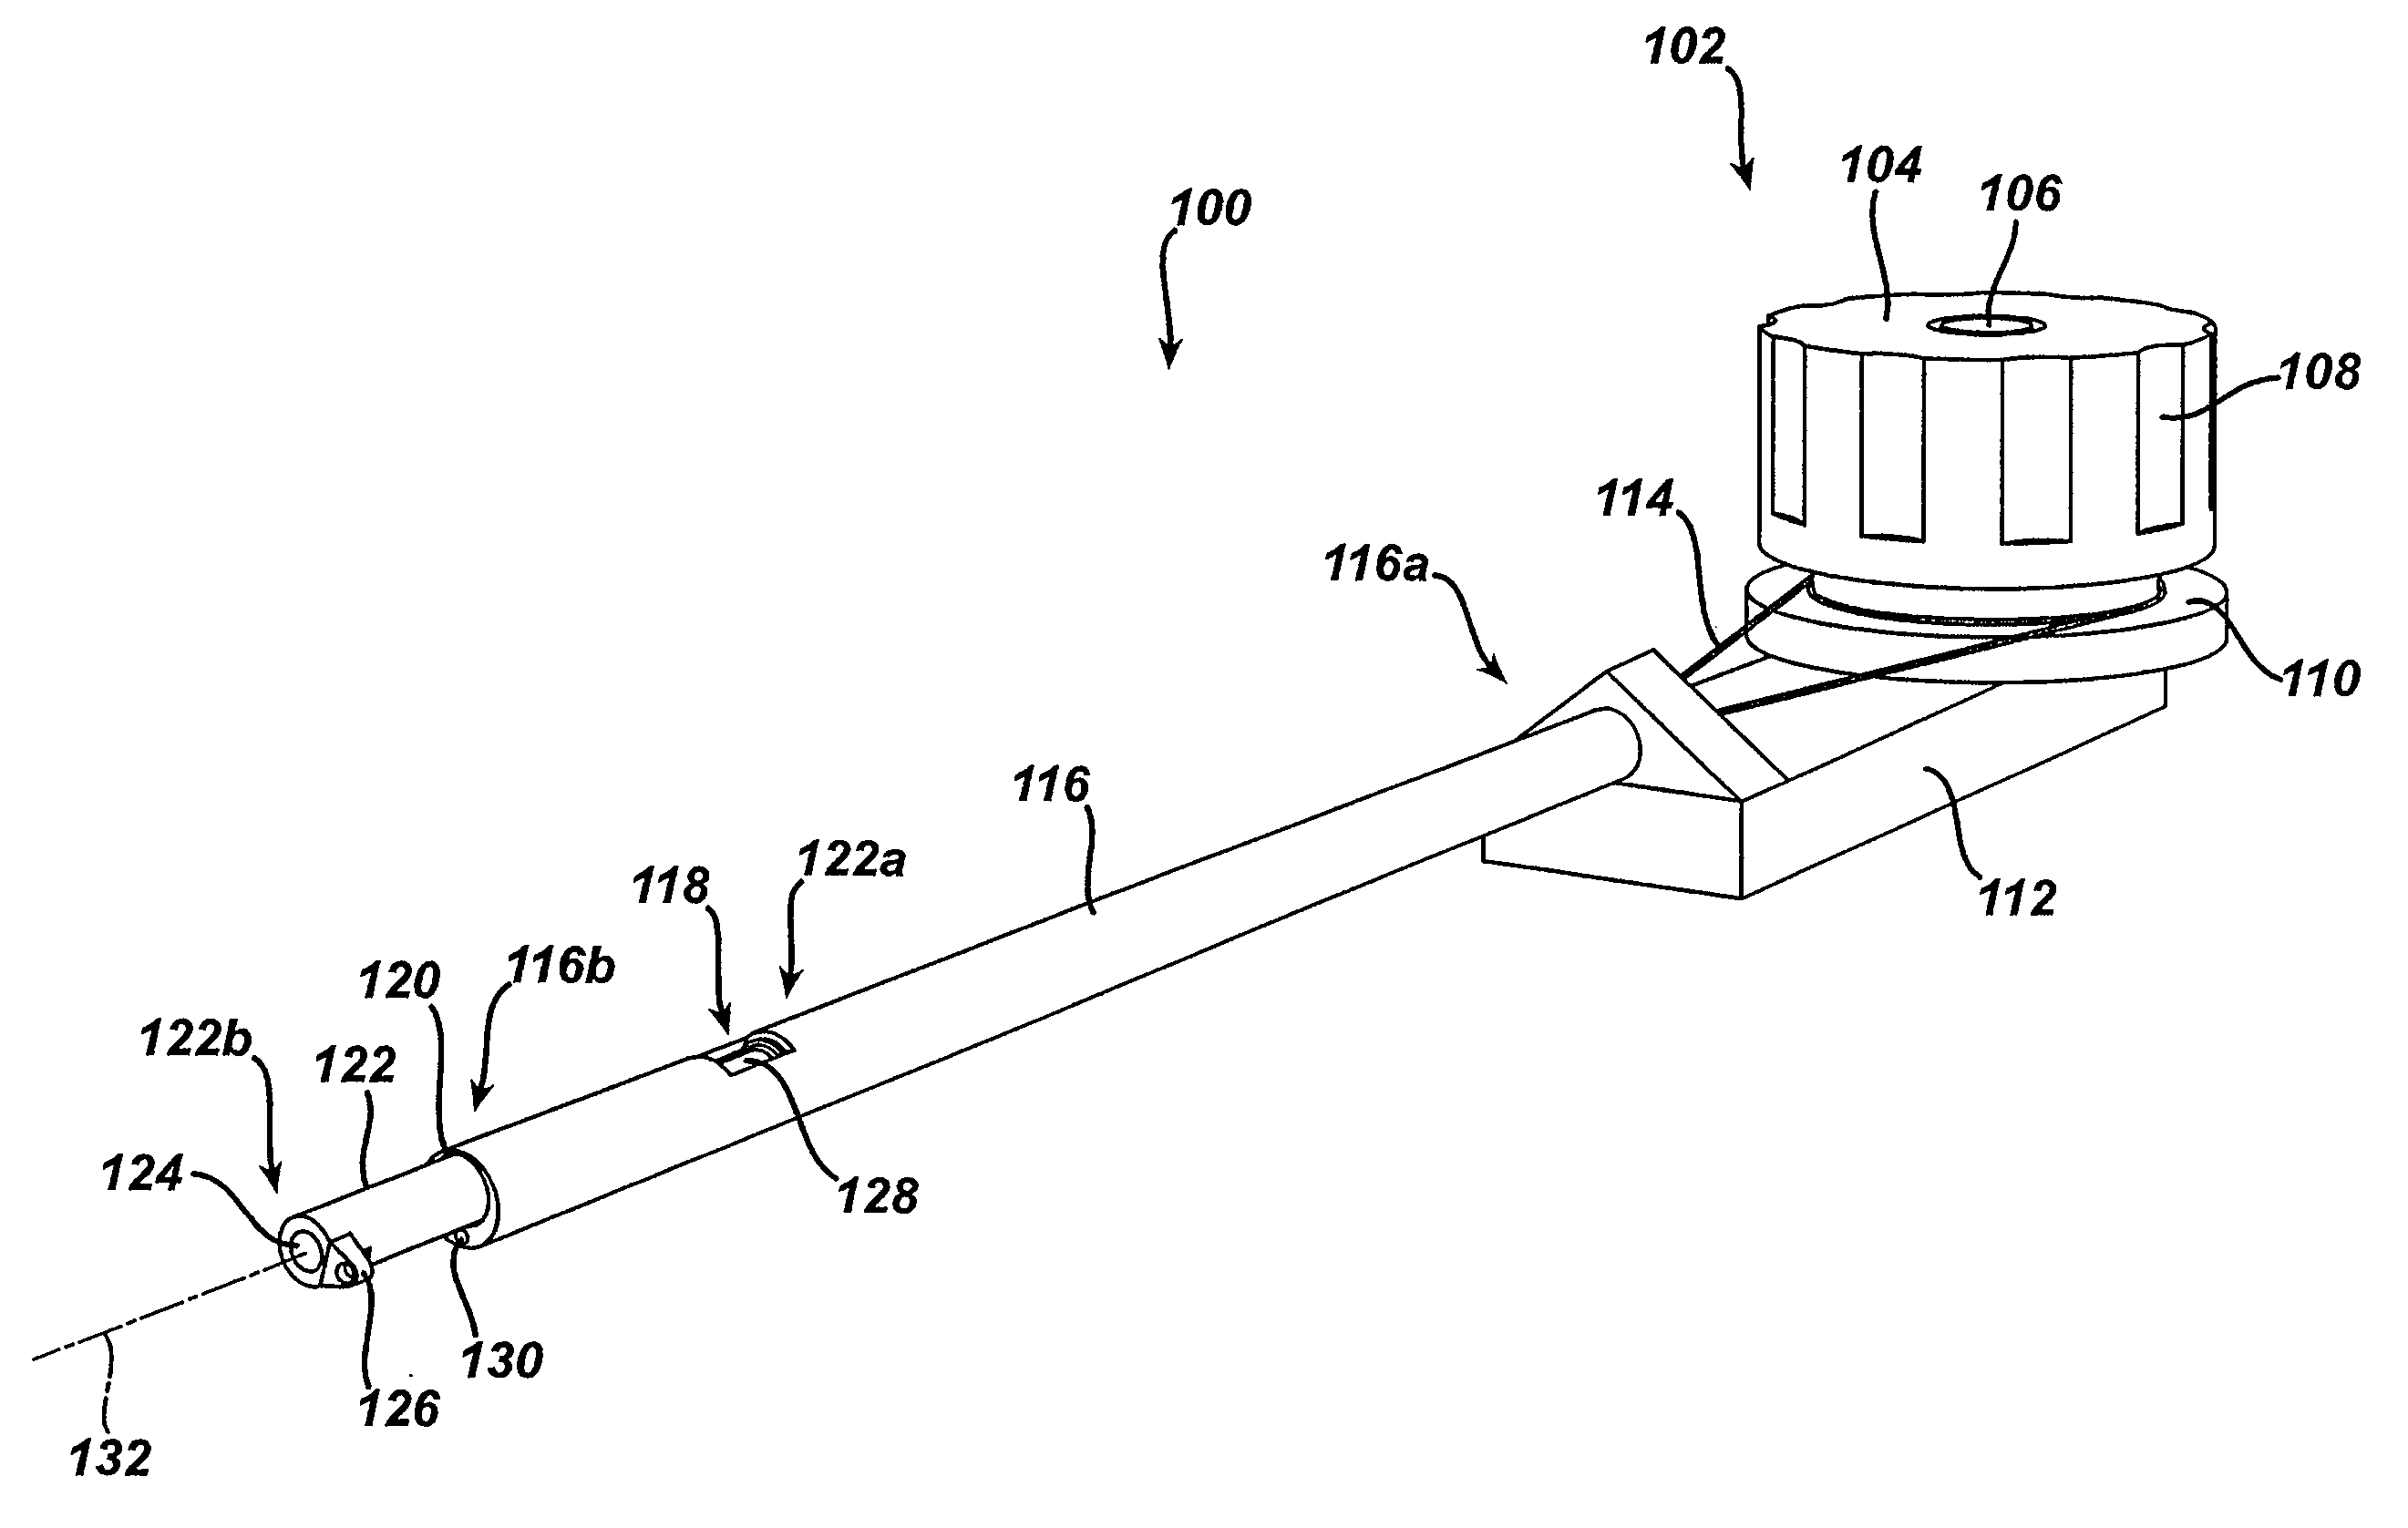 Endoscopic tissue resection device